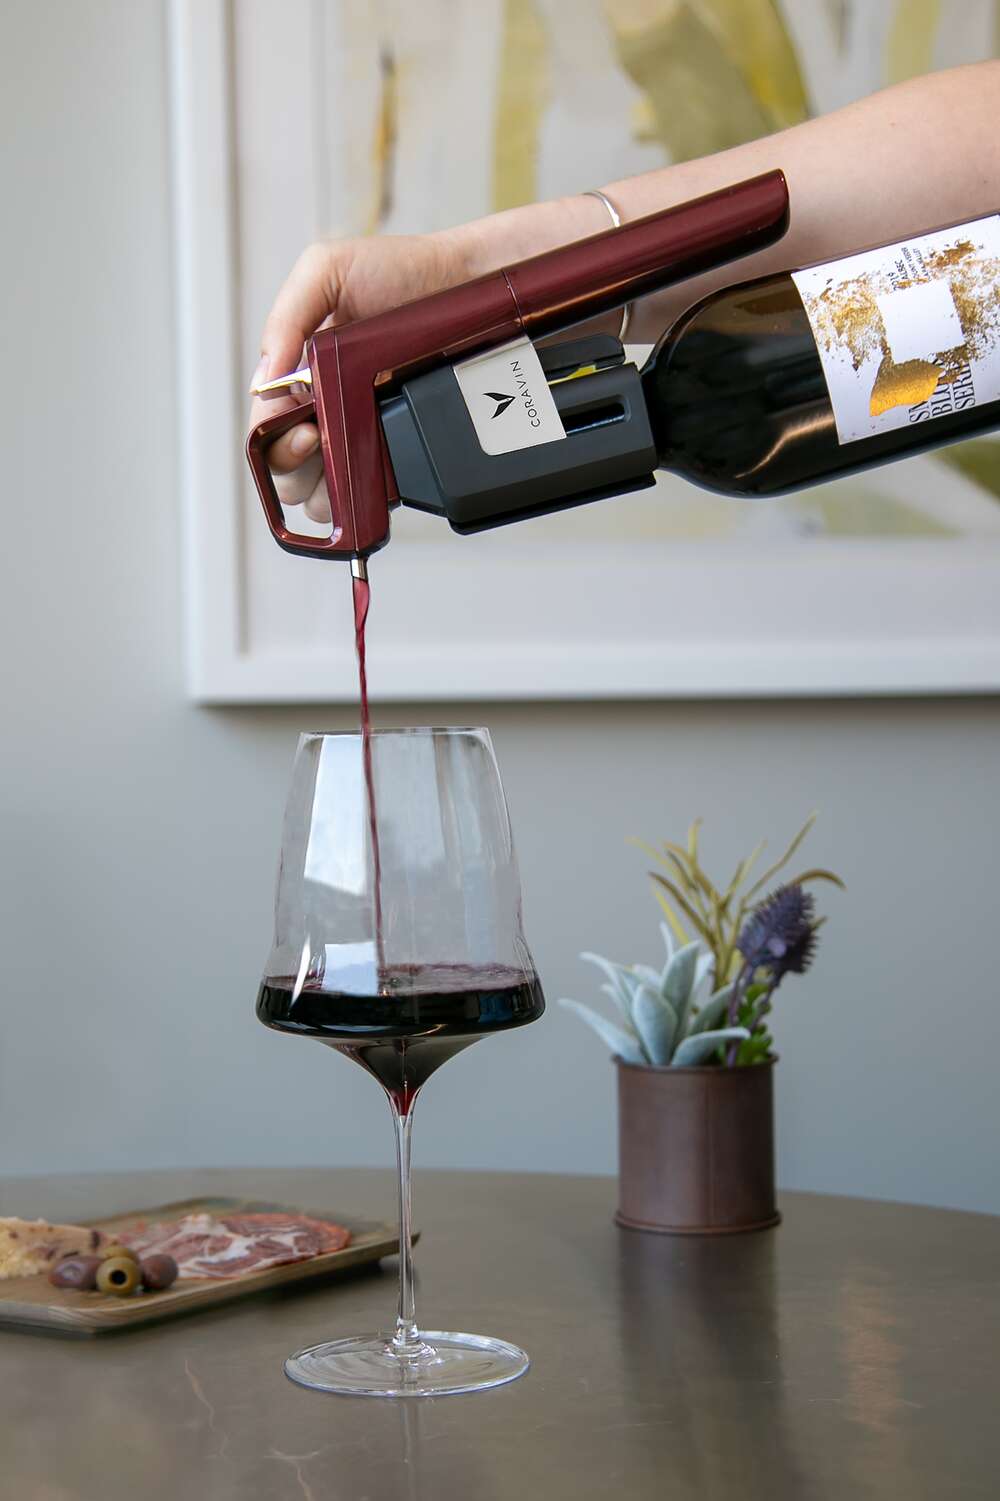 Coravin Wine Preservation Systems and Accessories | Coravin 